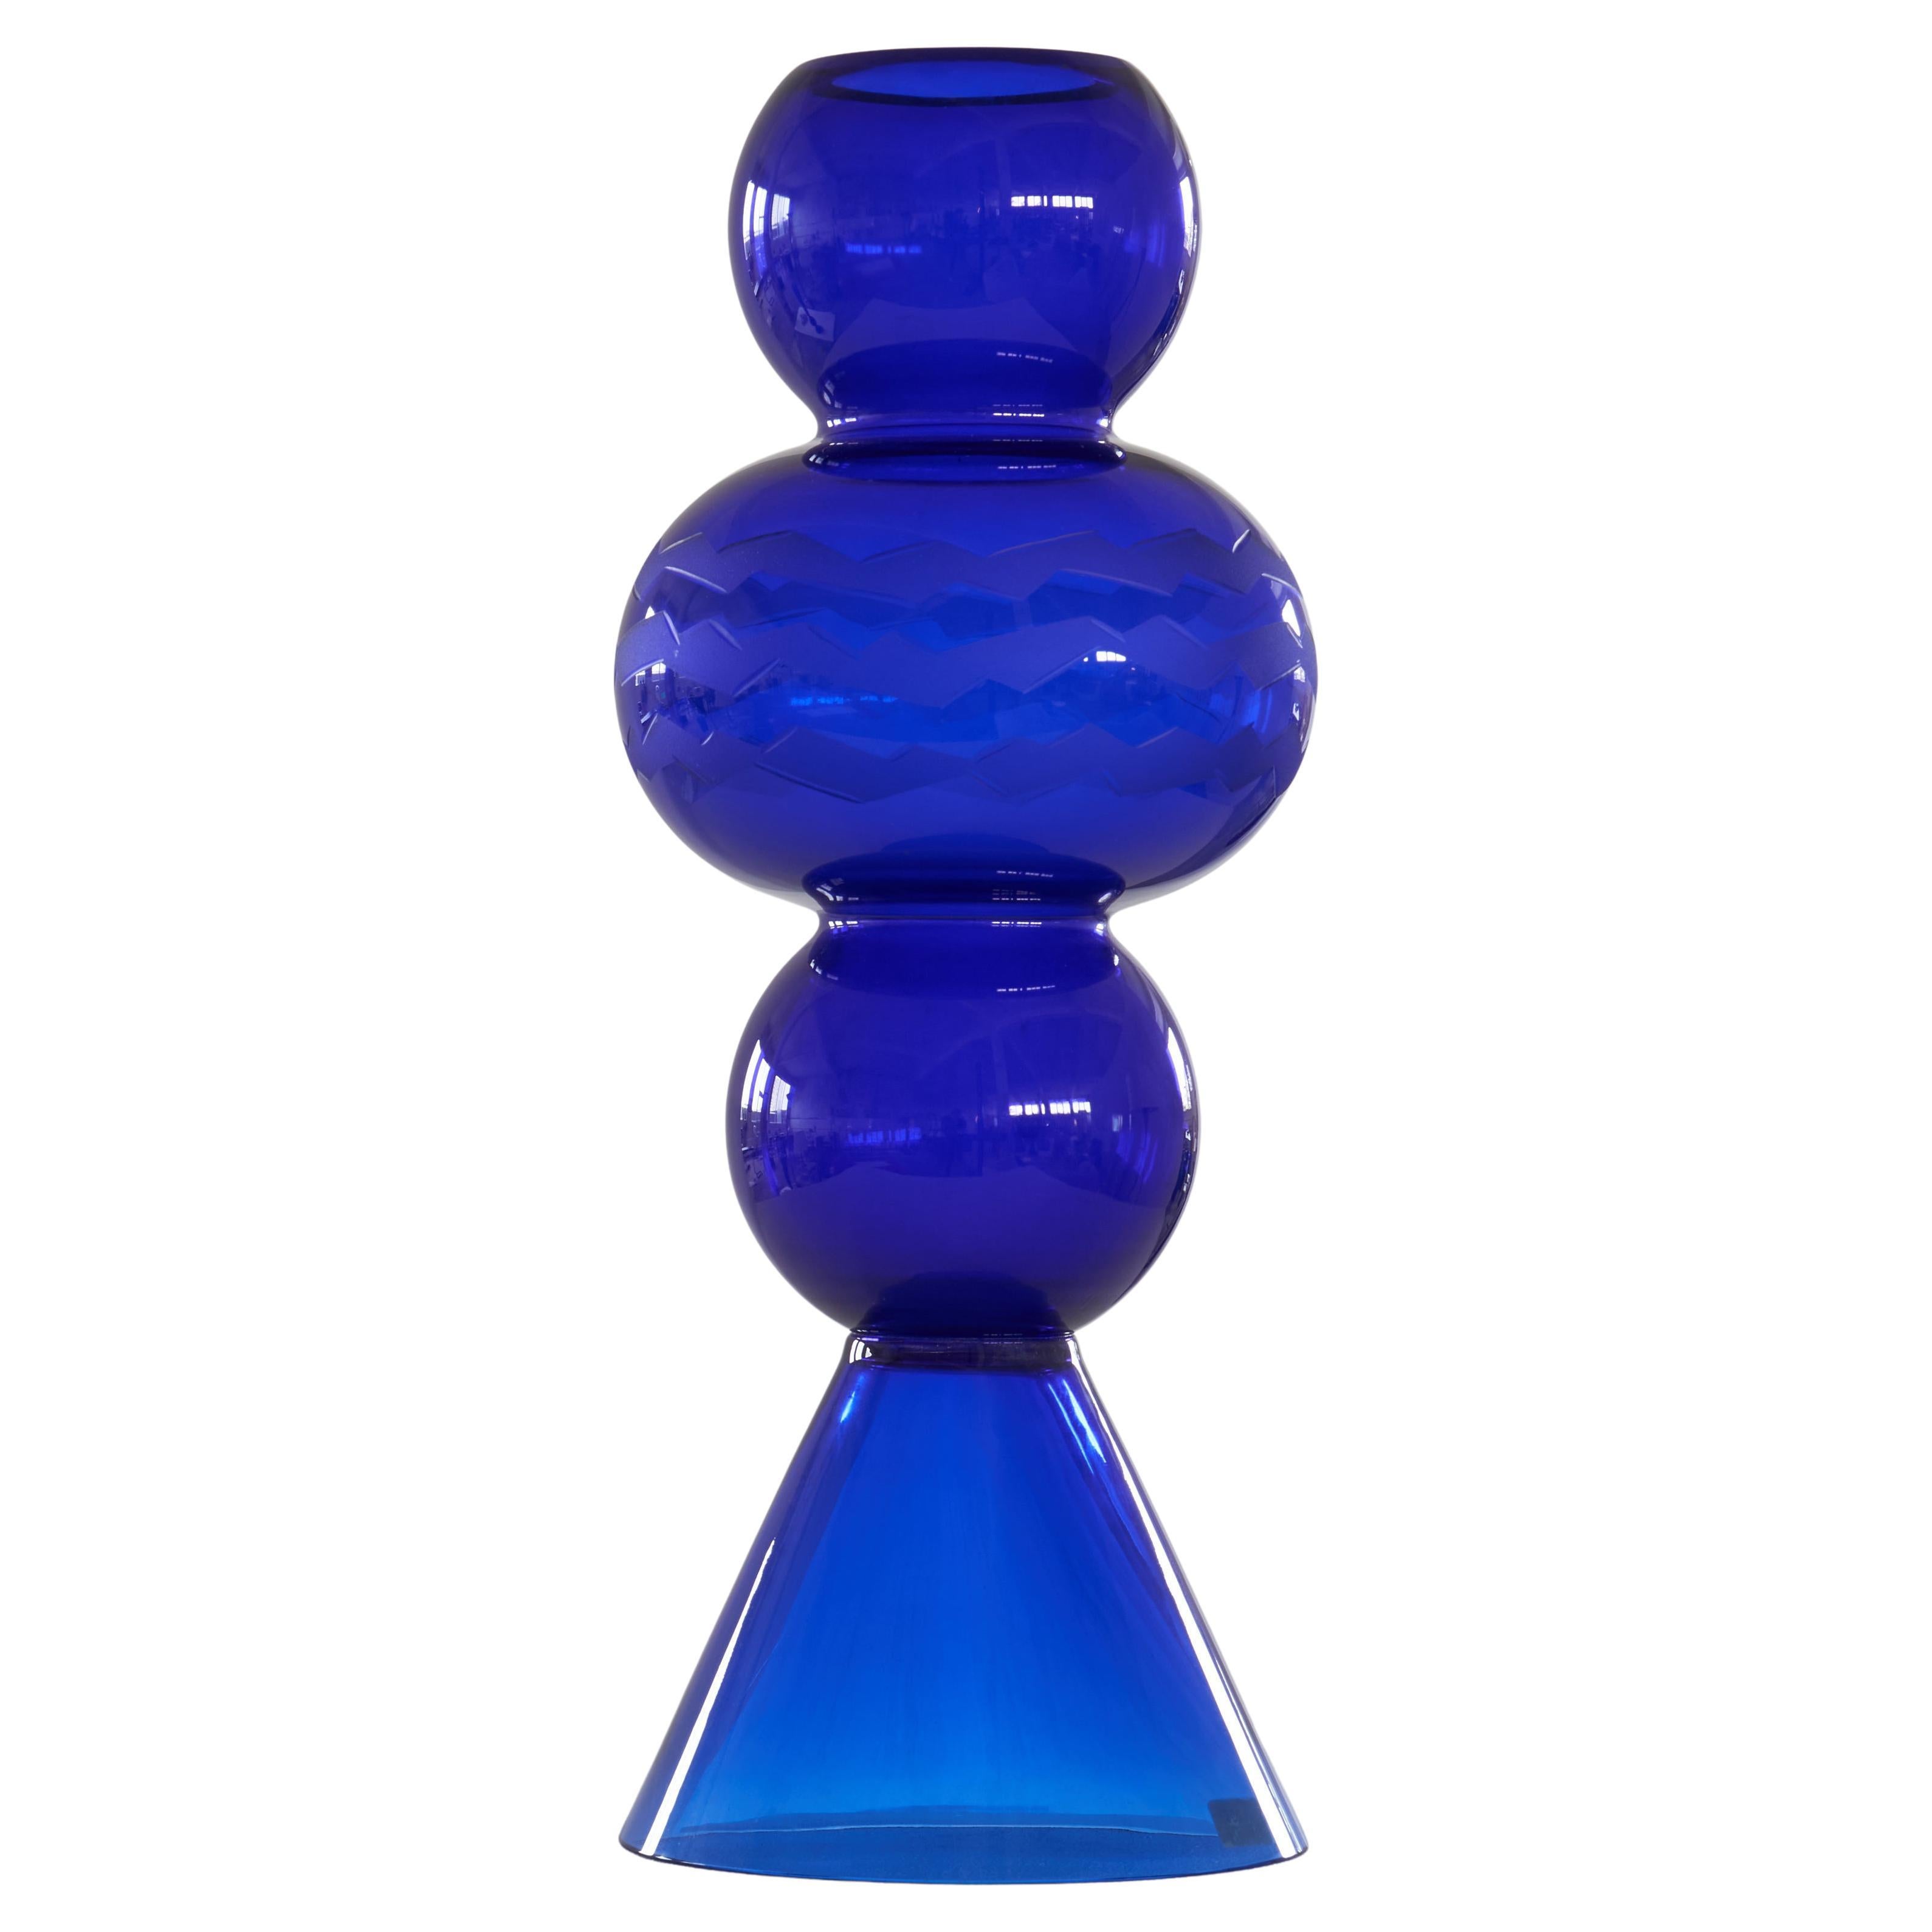 Large Memphis Glass Object by Matteo Thun for Tiffany & Co. 1987 For Sale